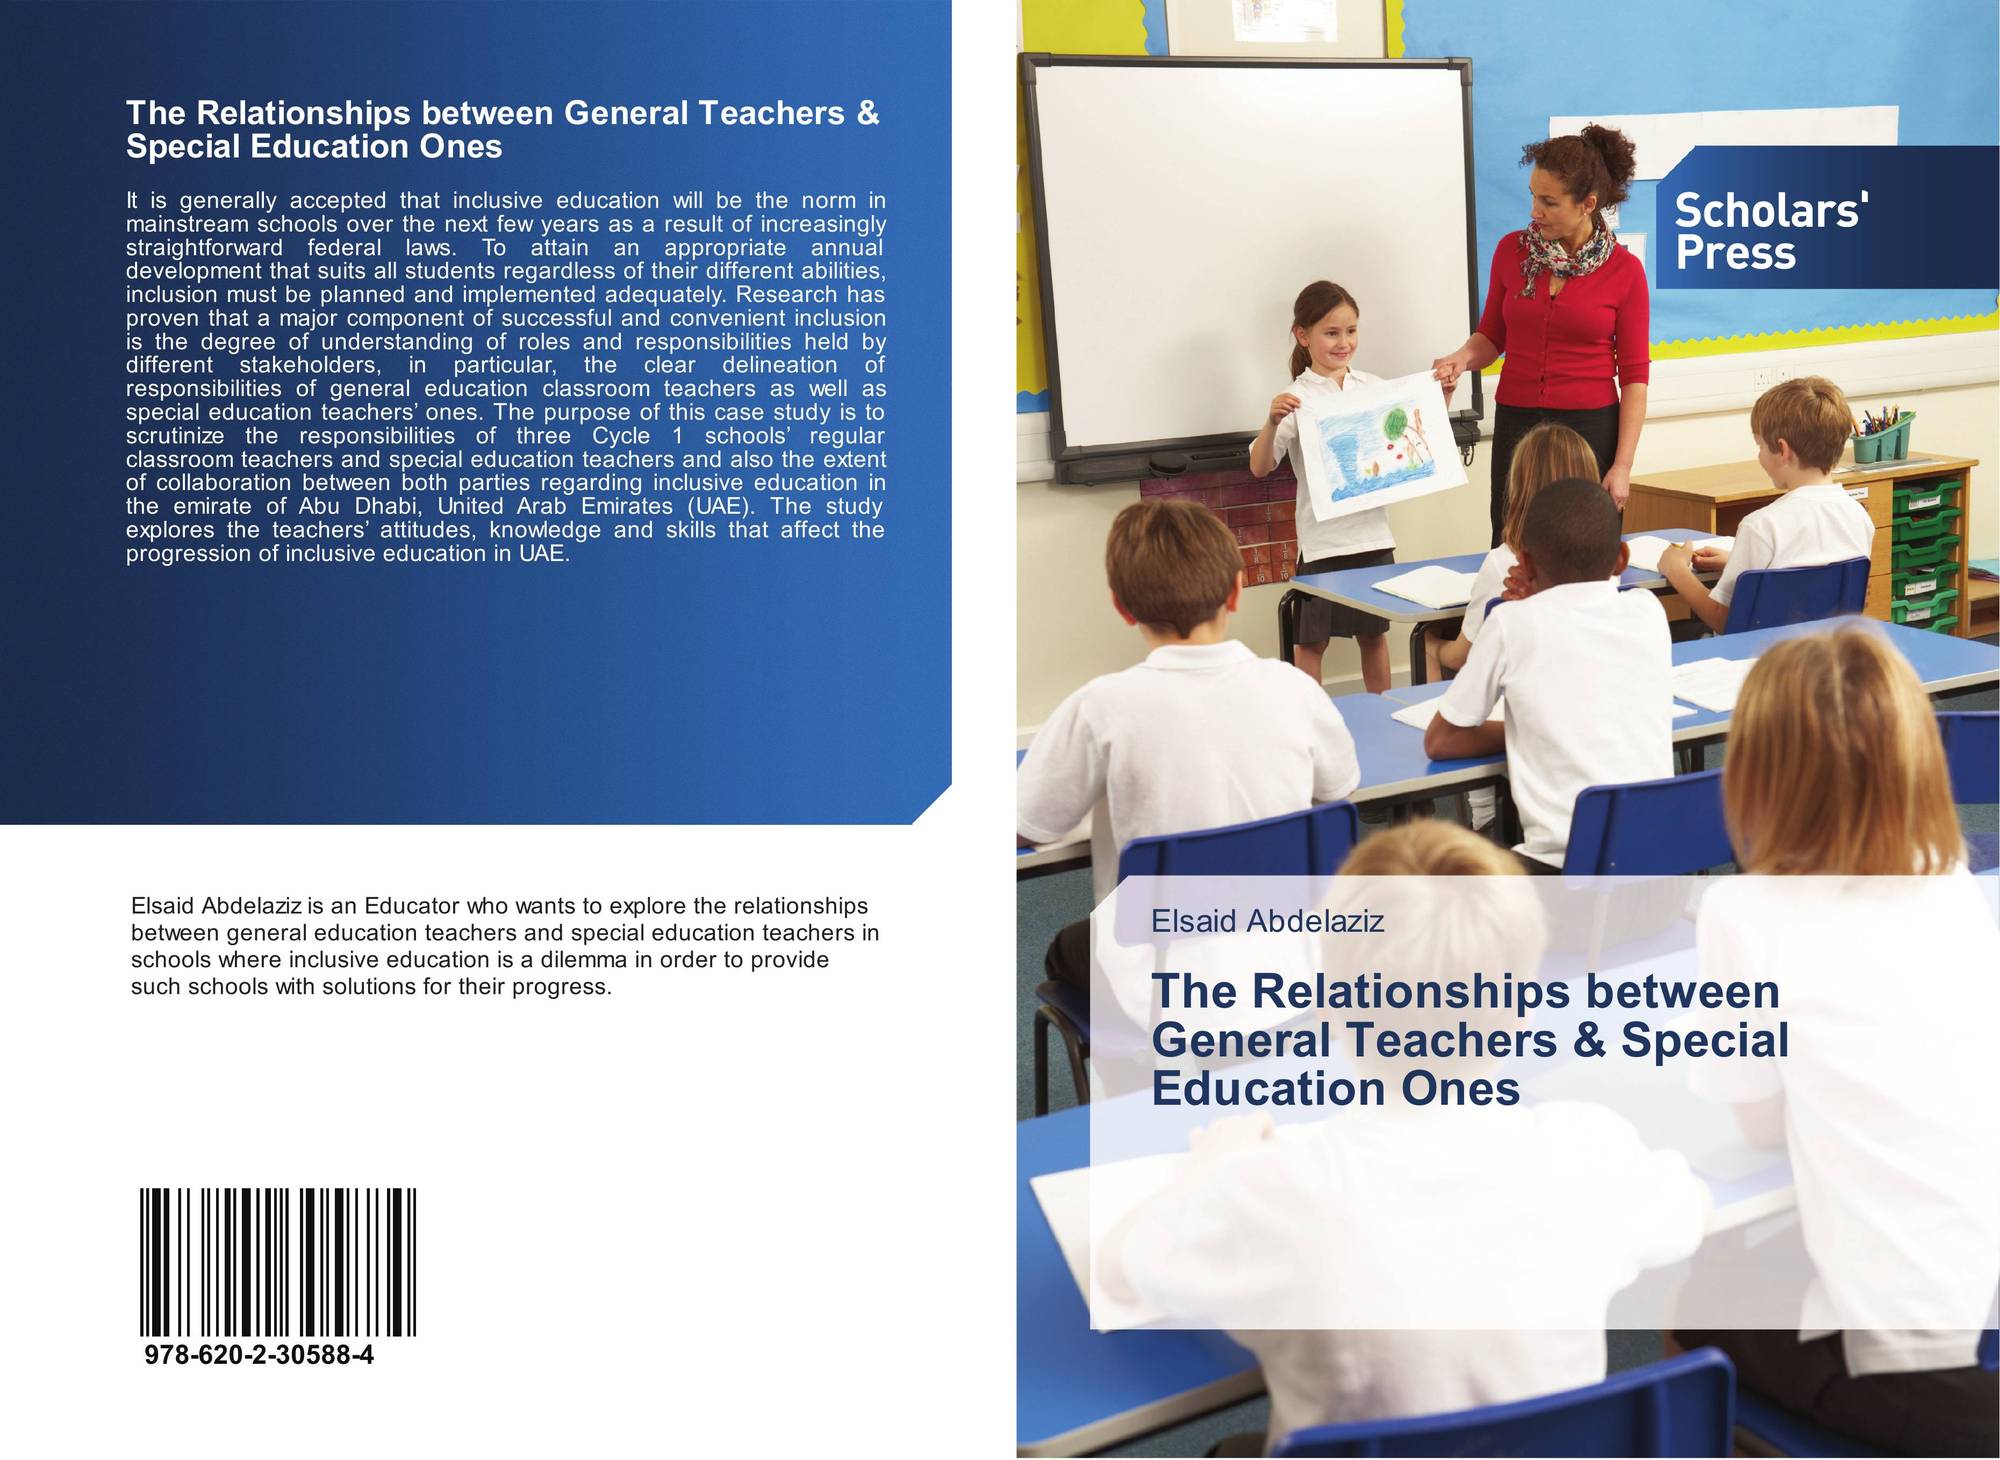 Continuous professional Development of physics teachers of General secondary Schools book Cover.